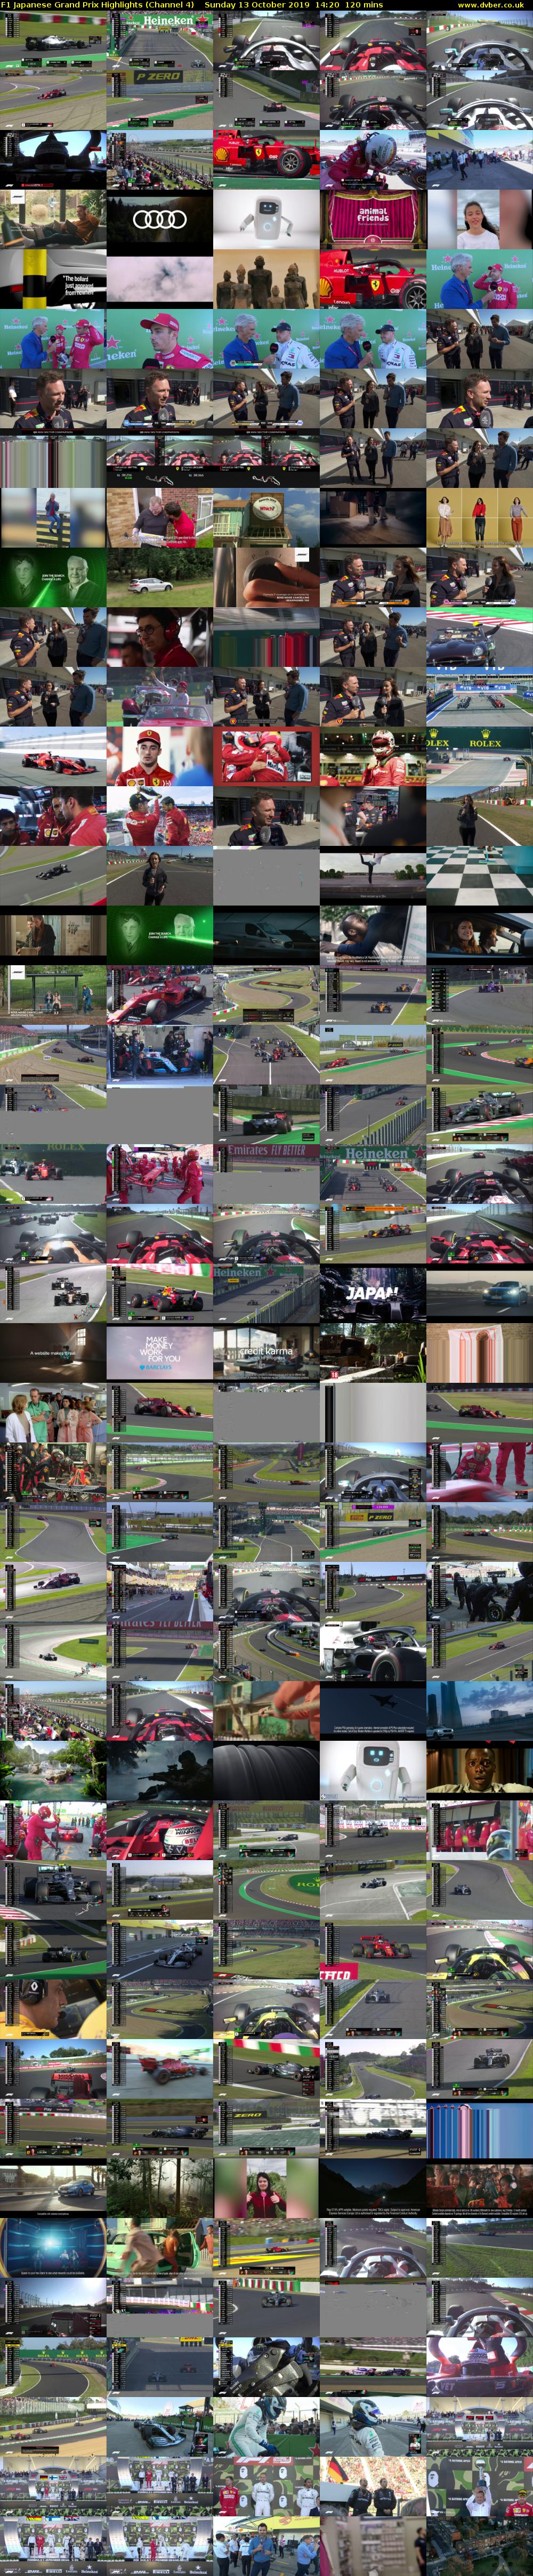 F1 Japanese Grand Prix Highlights (Channel 4) Sunday 13 October 2019 14:20 - 16:20